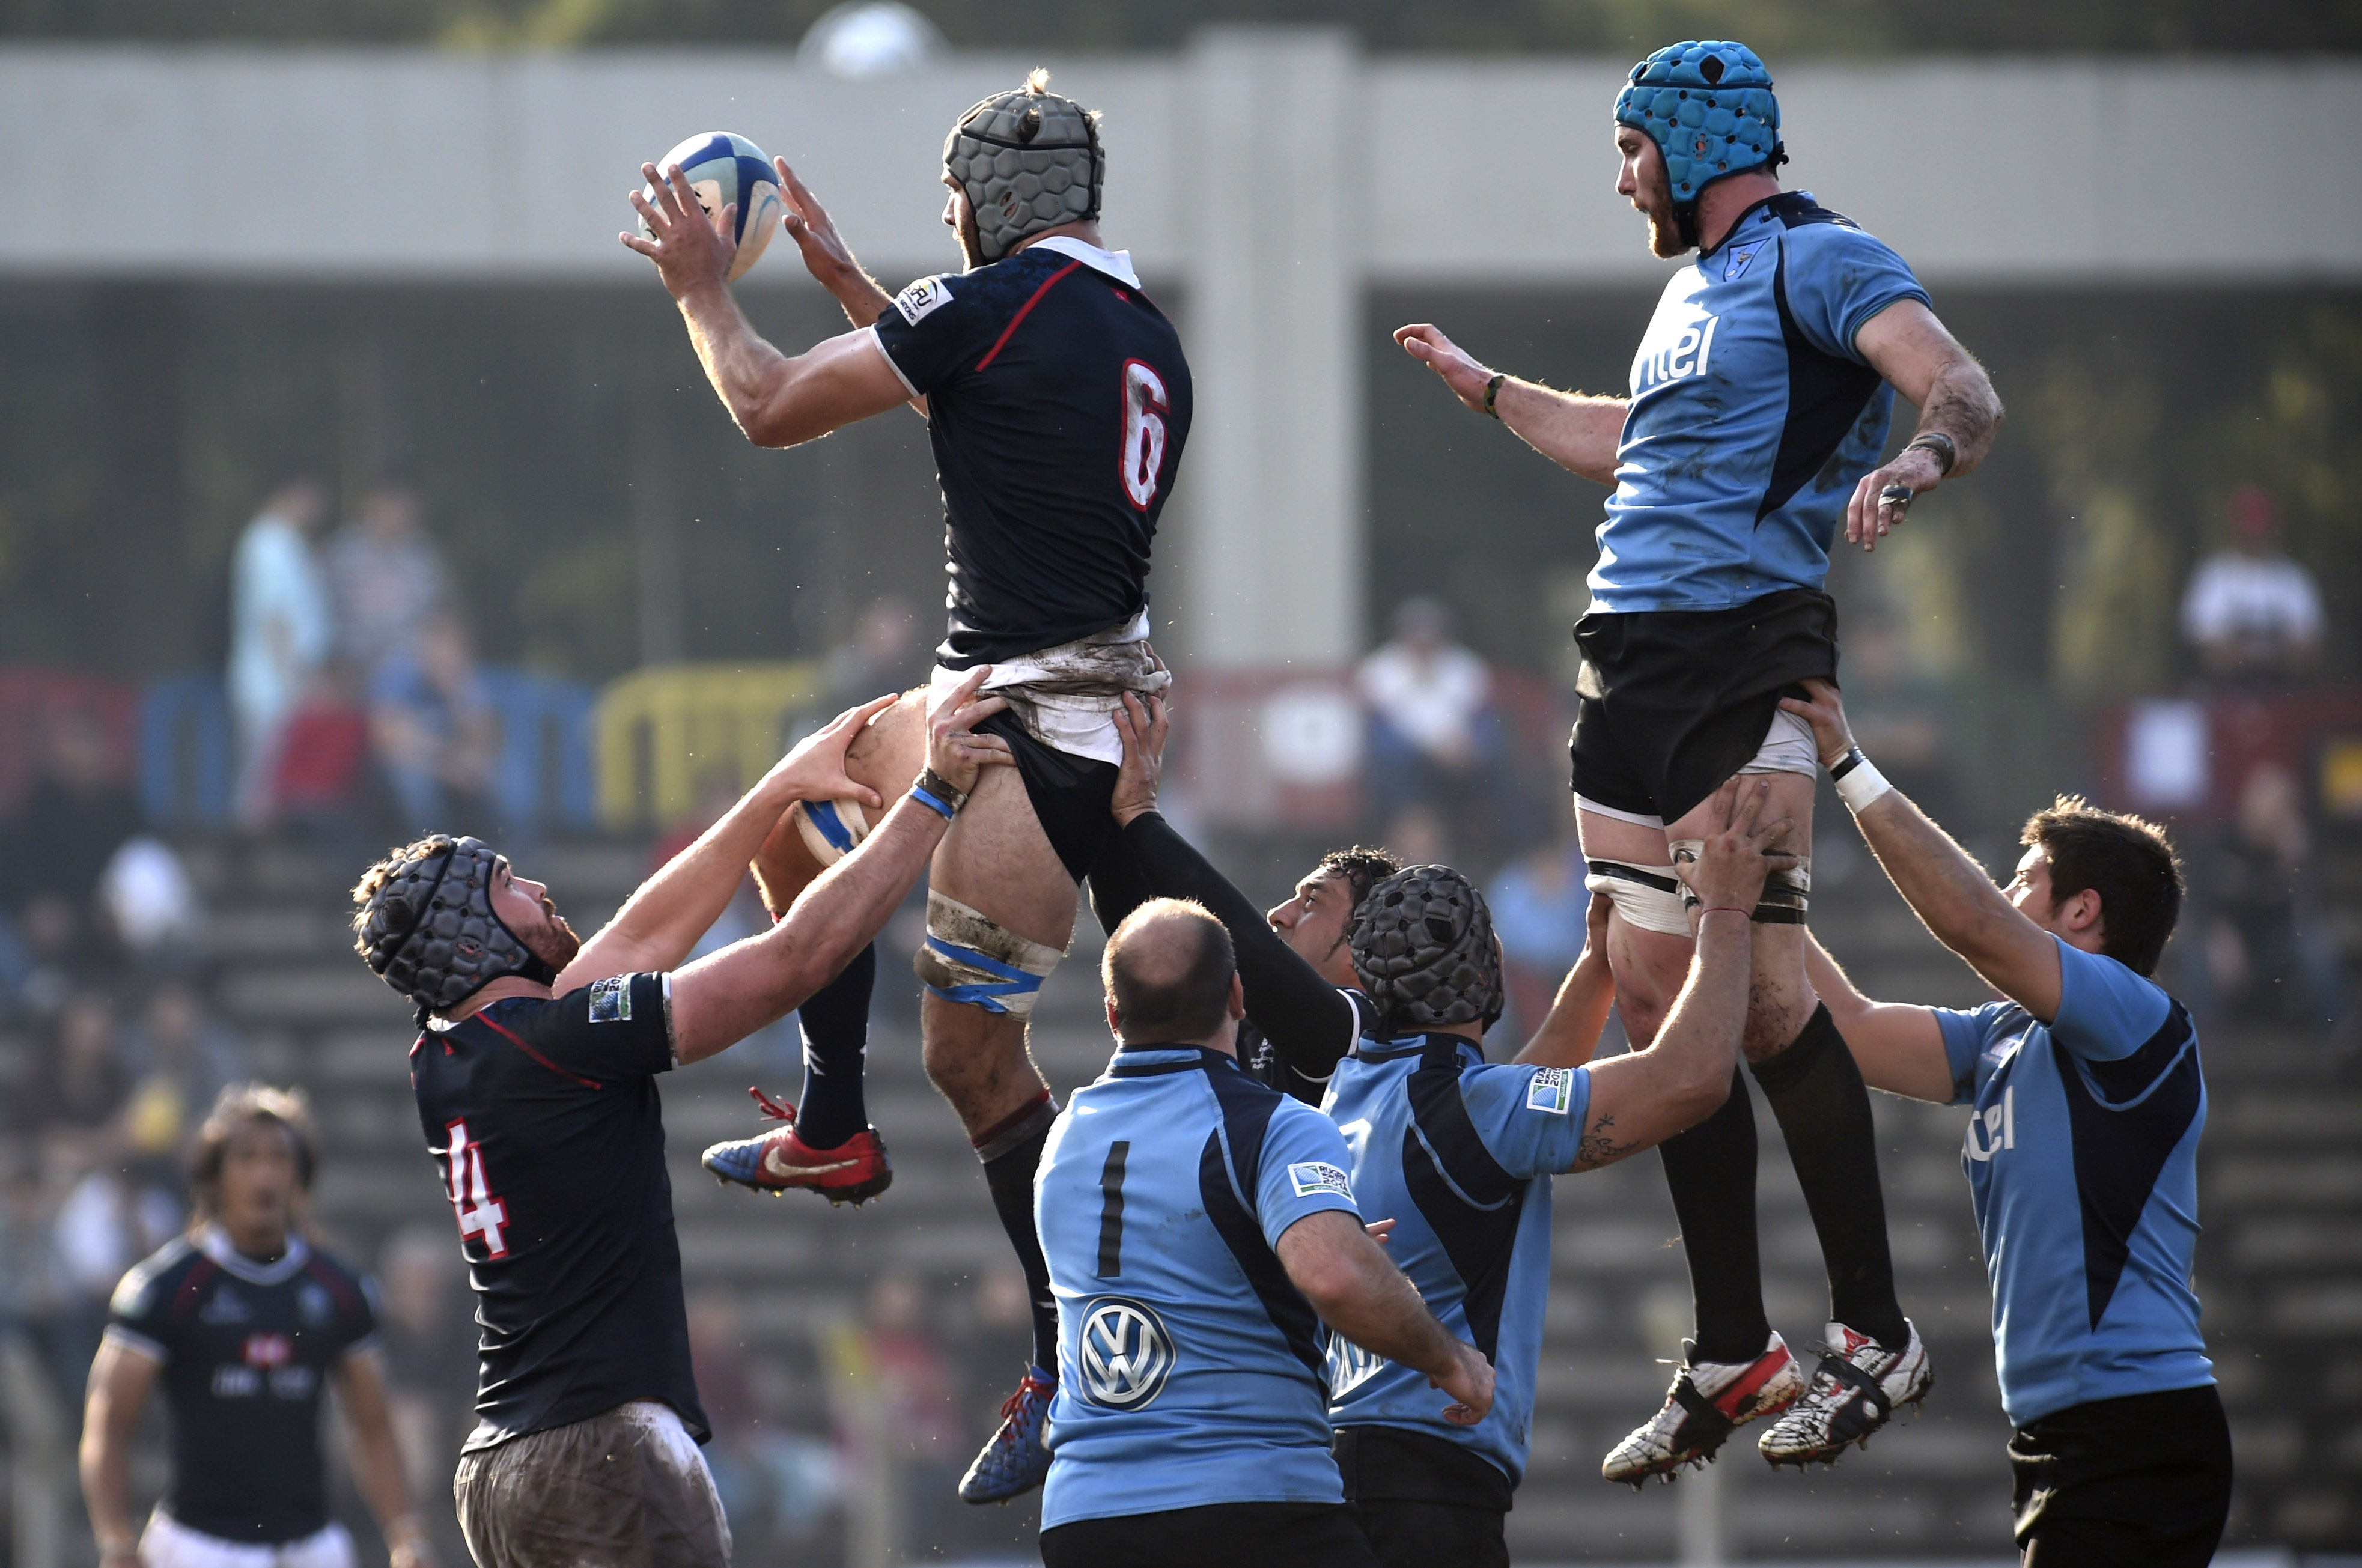 Captain Nick Hewson wins the line-out ball for Hong Kong against Uruguay. Photo: Xinhua